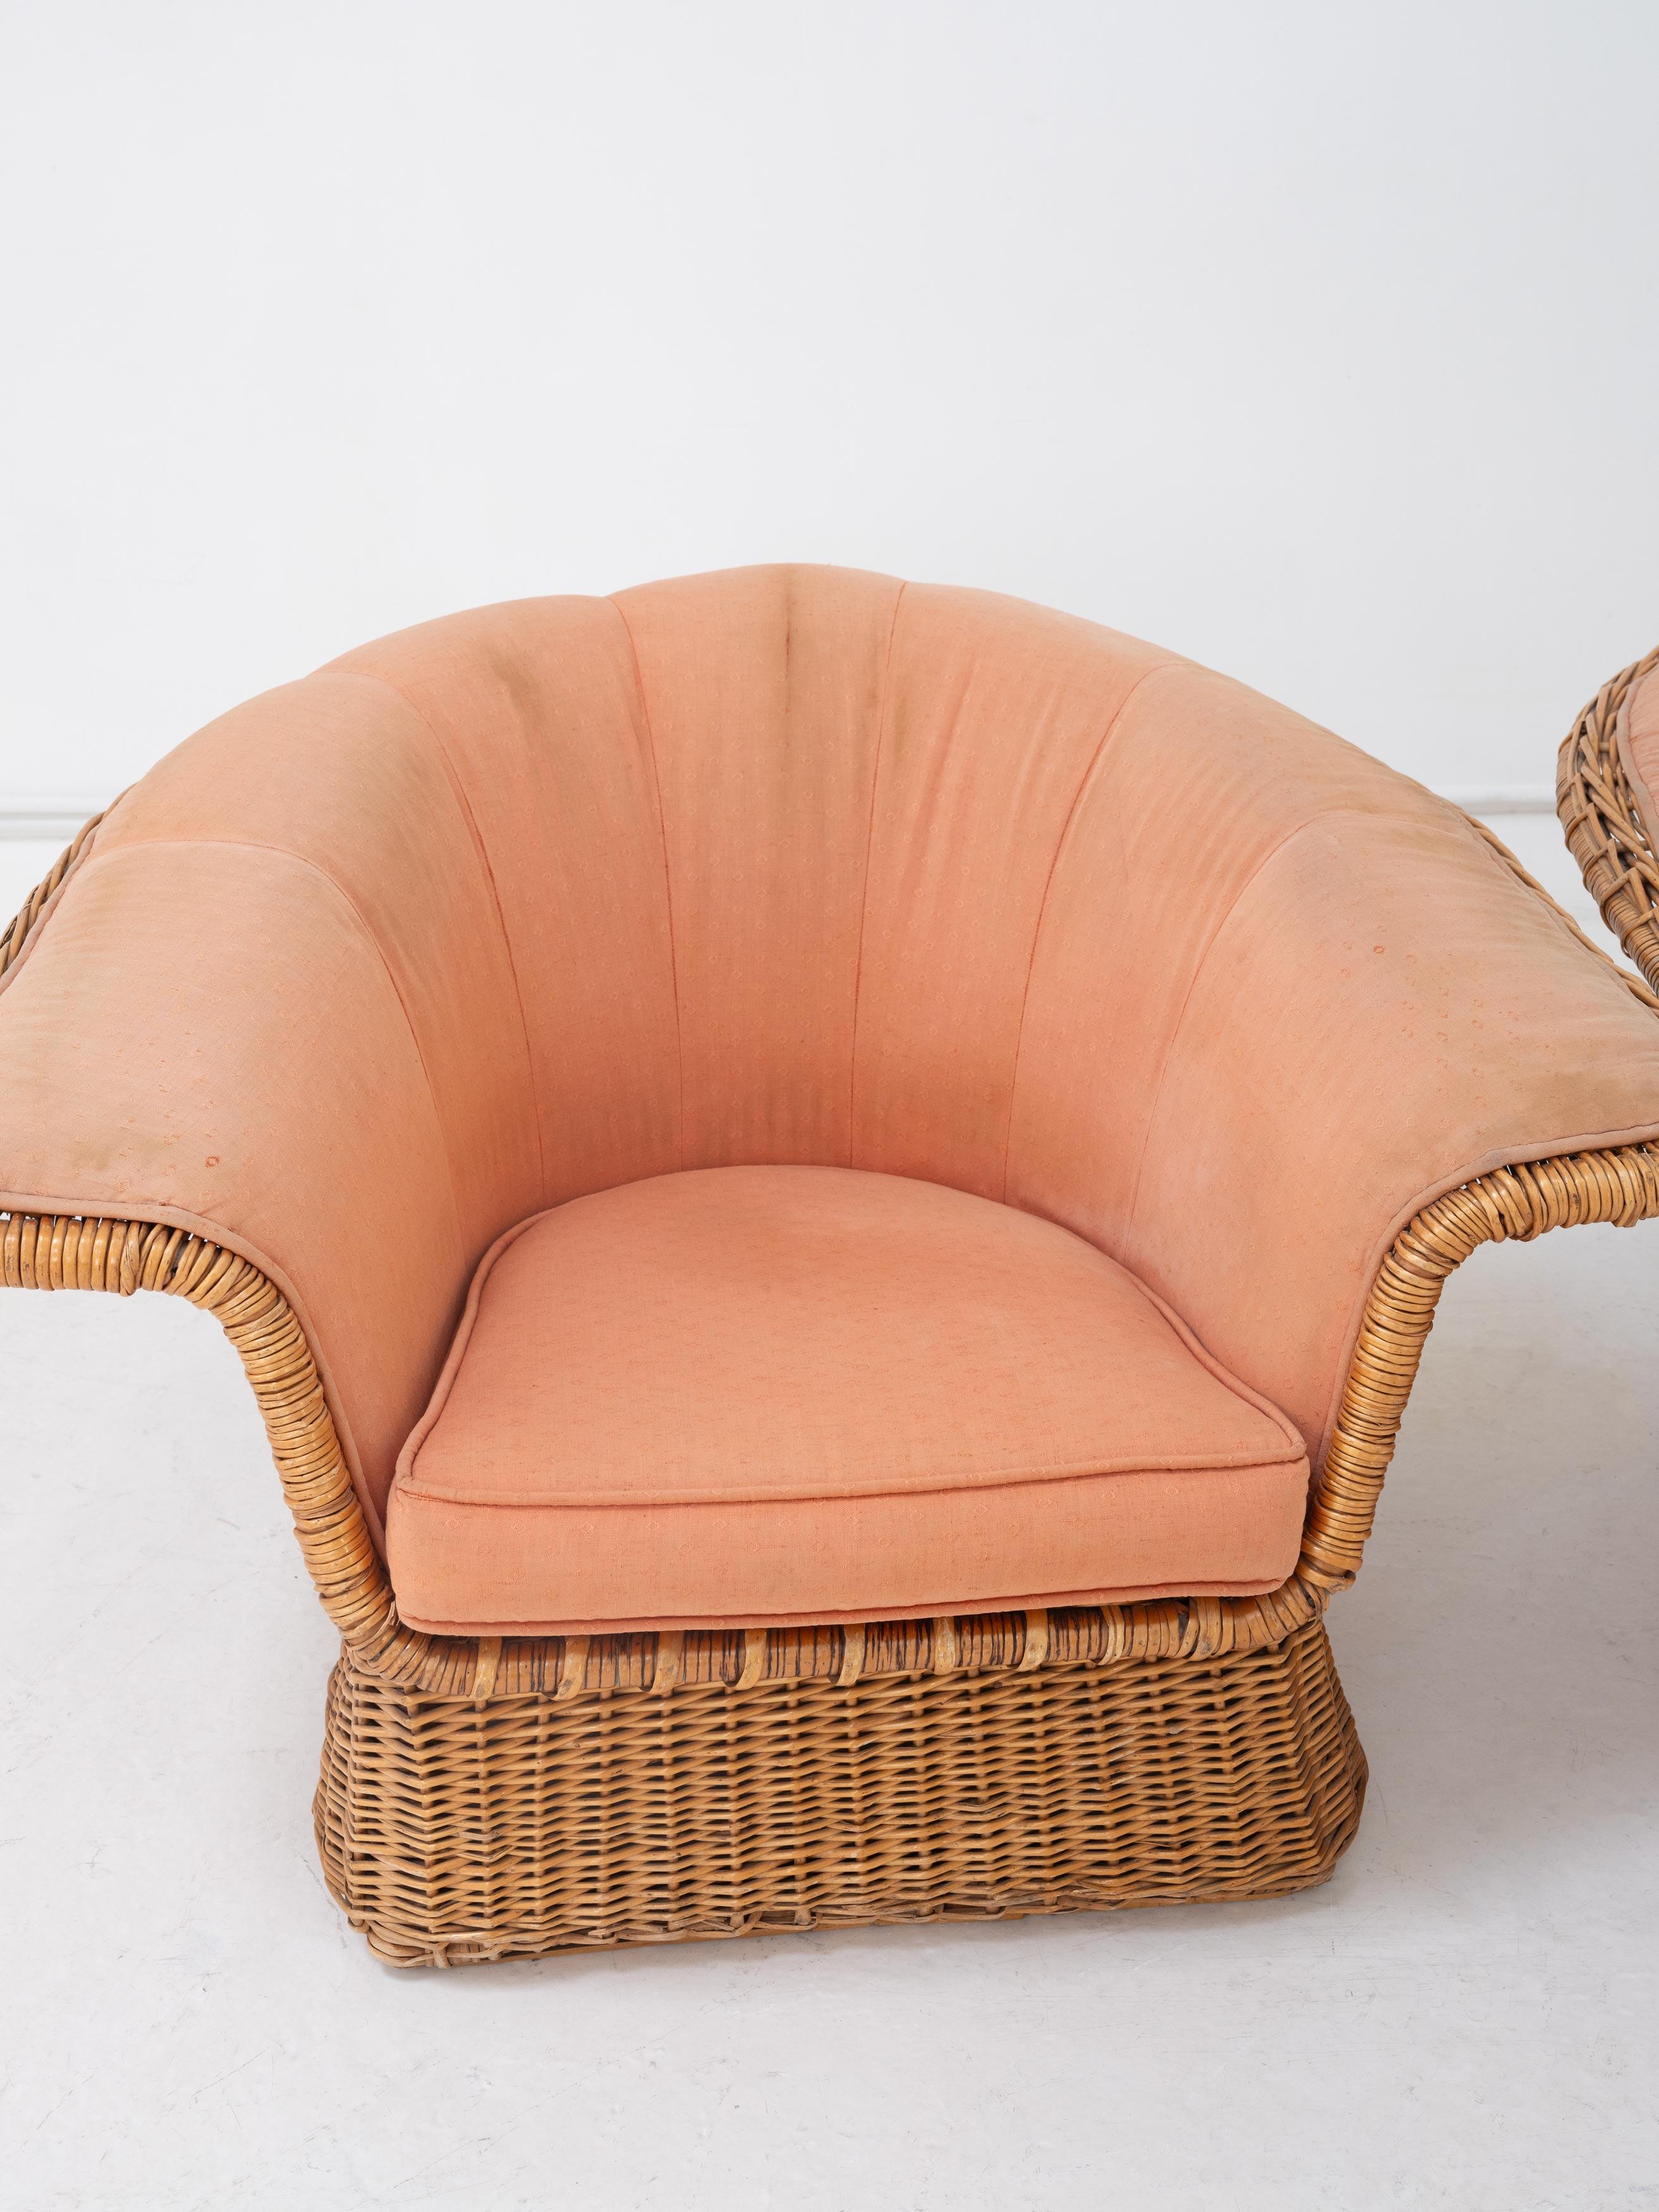 A Pair of Wicker Armchairs by Lyda Levi for McGuire, c.1970 For Sale 4